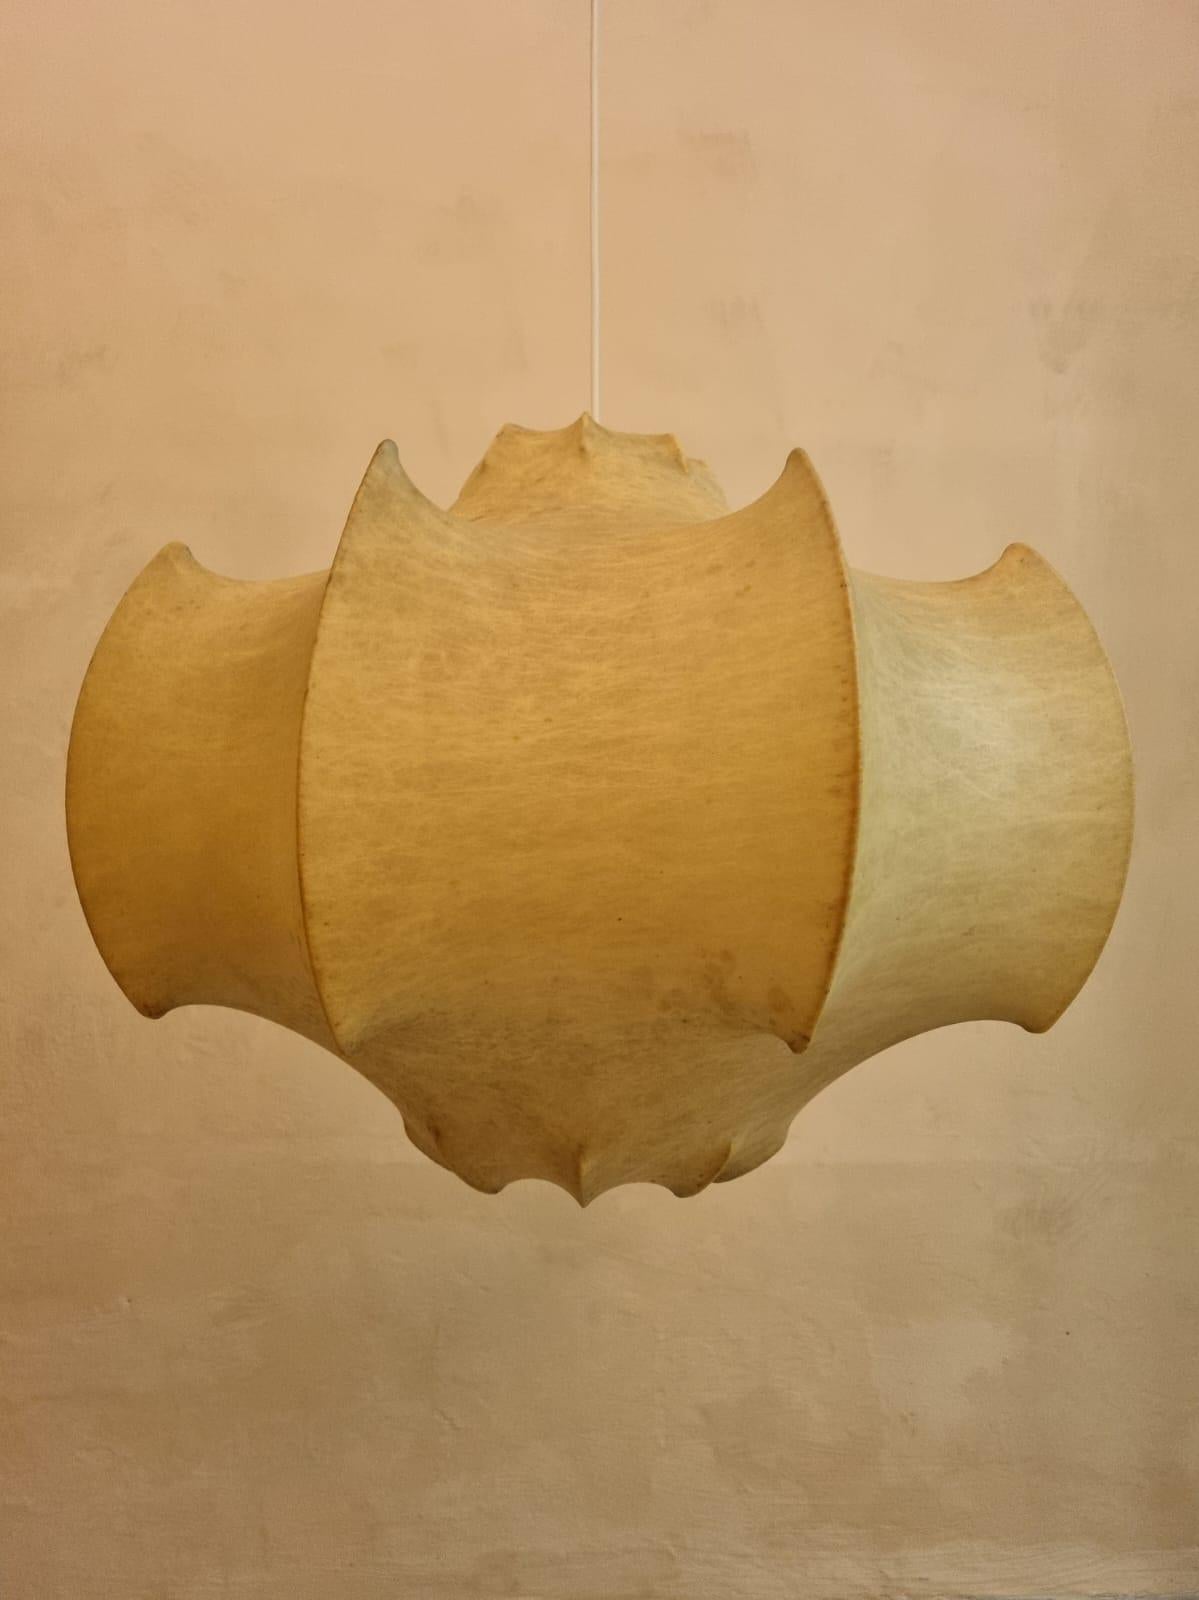 Viscontea pendant lamp by Achille and Piergiacomo Castiglioni for Flos, 1960 
(First production).